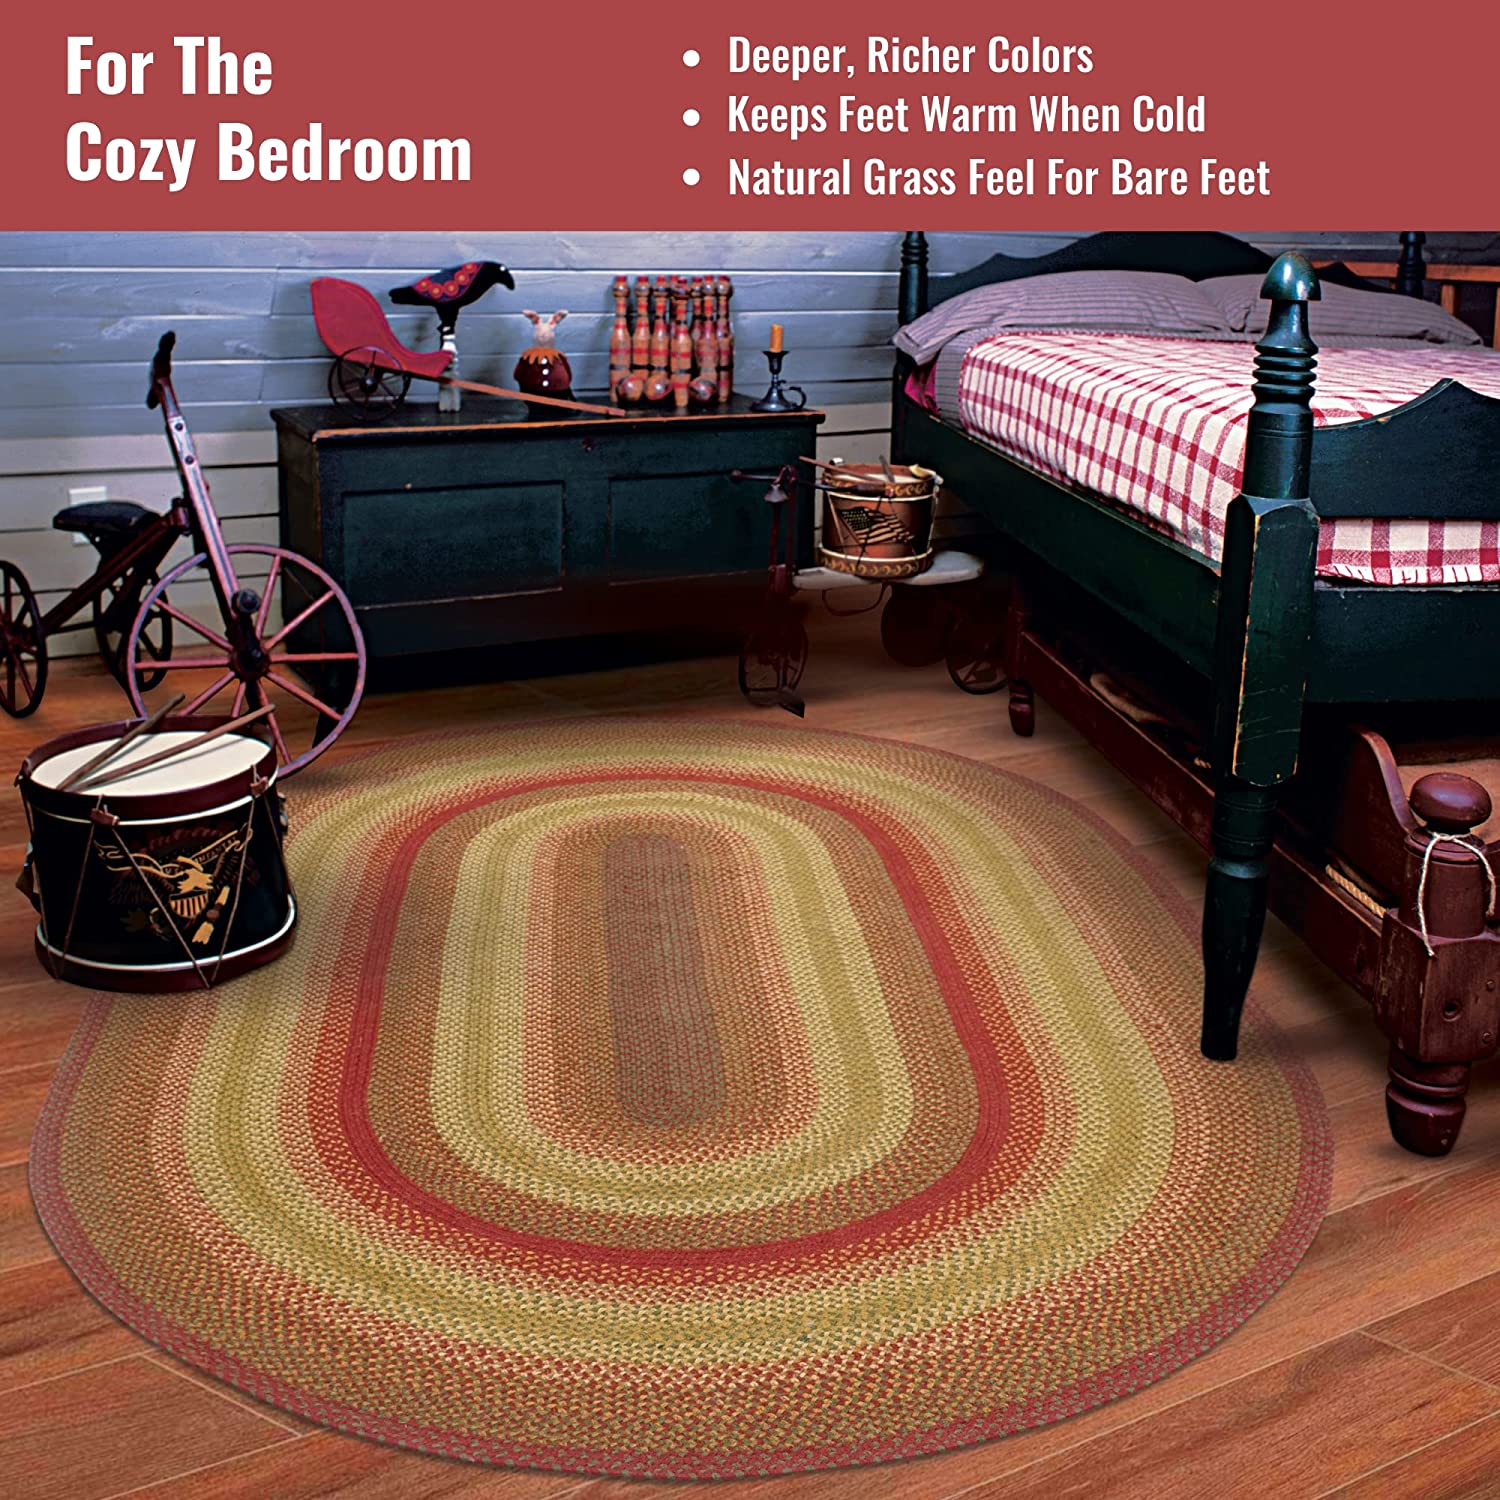 Homespice Decor Cider Barn Red Braided - 20 X 30 Oval Area Rug Area Rugs